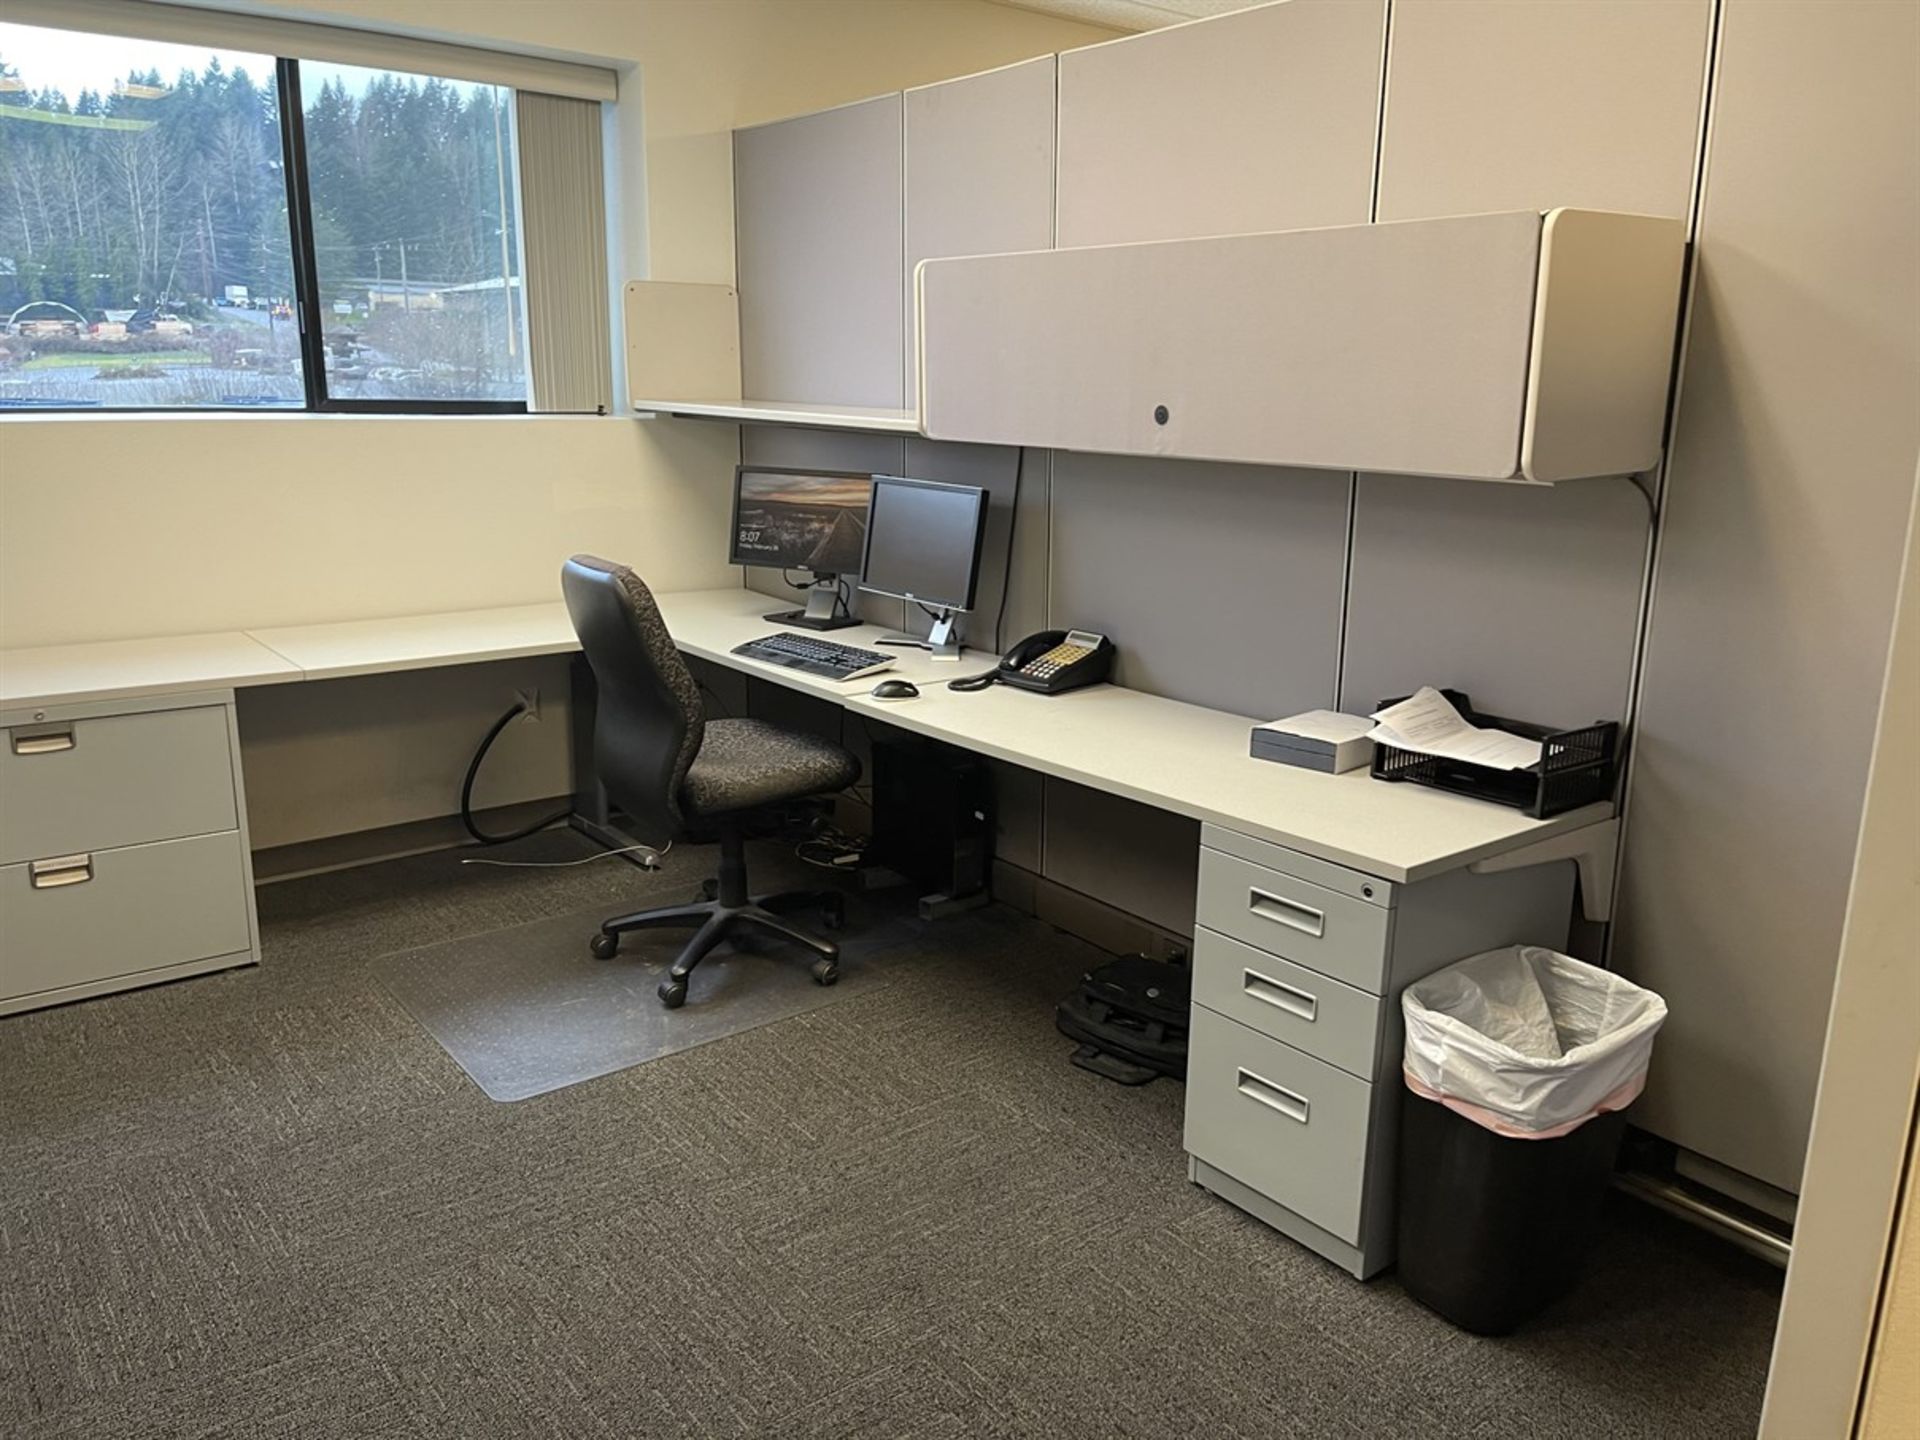 Office Area Comprising Large Cubicle Systems w/ Wall, Desks, and Chairs, (No Electronics or - Image 2 of 5